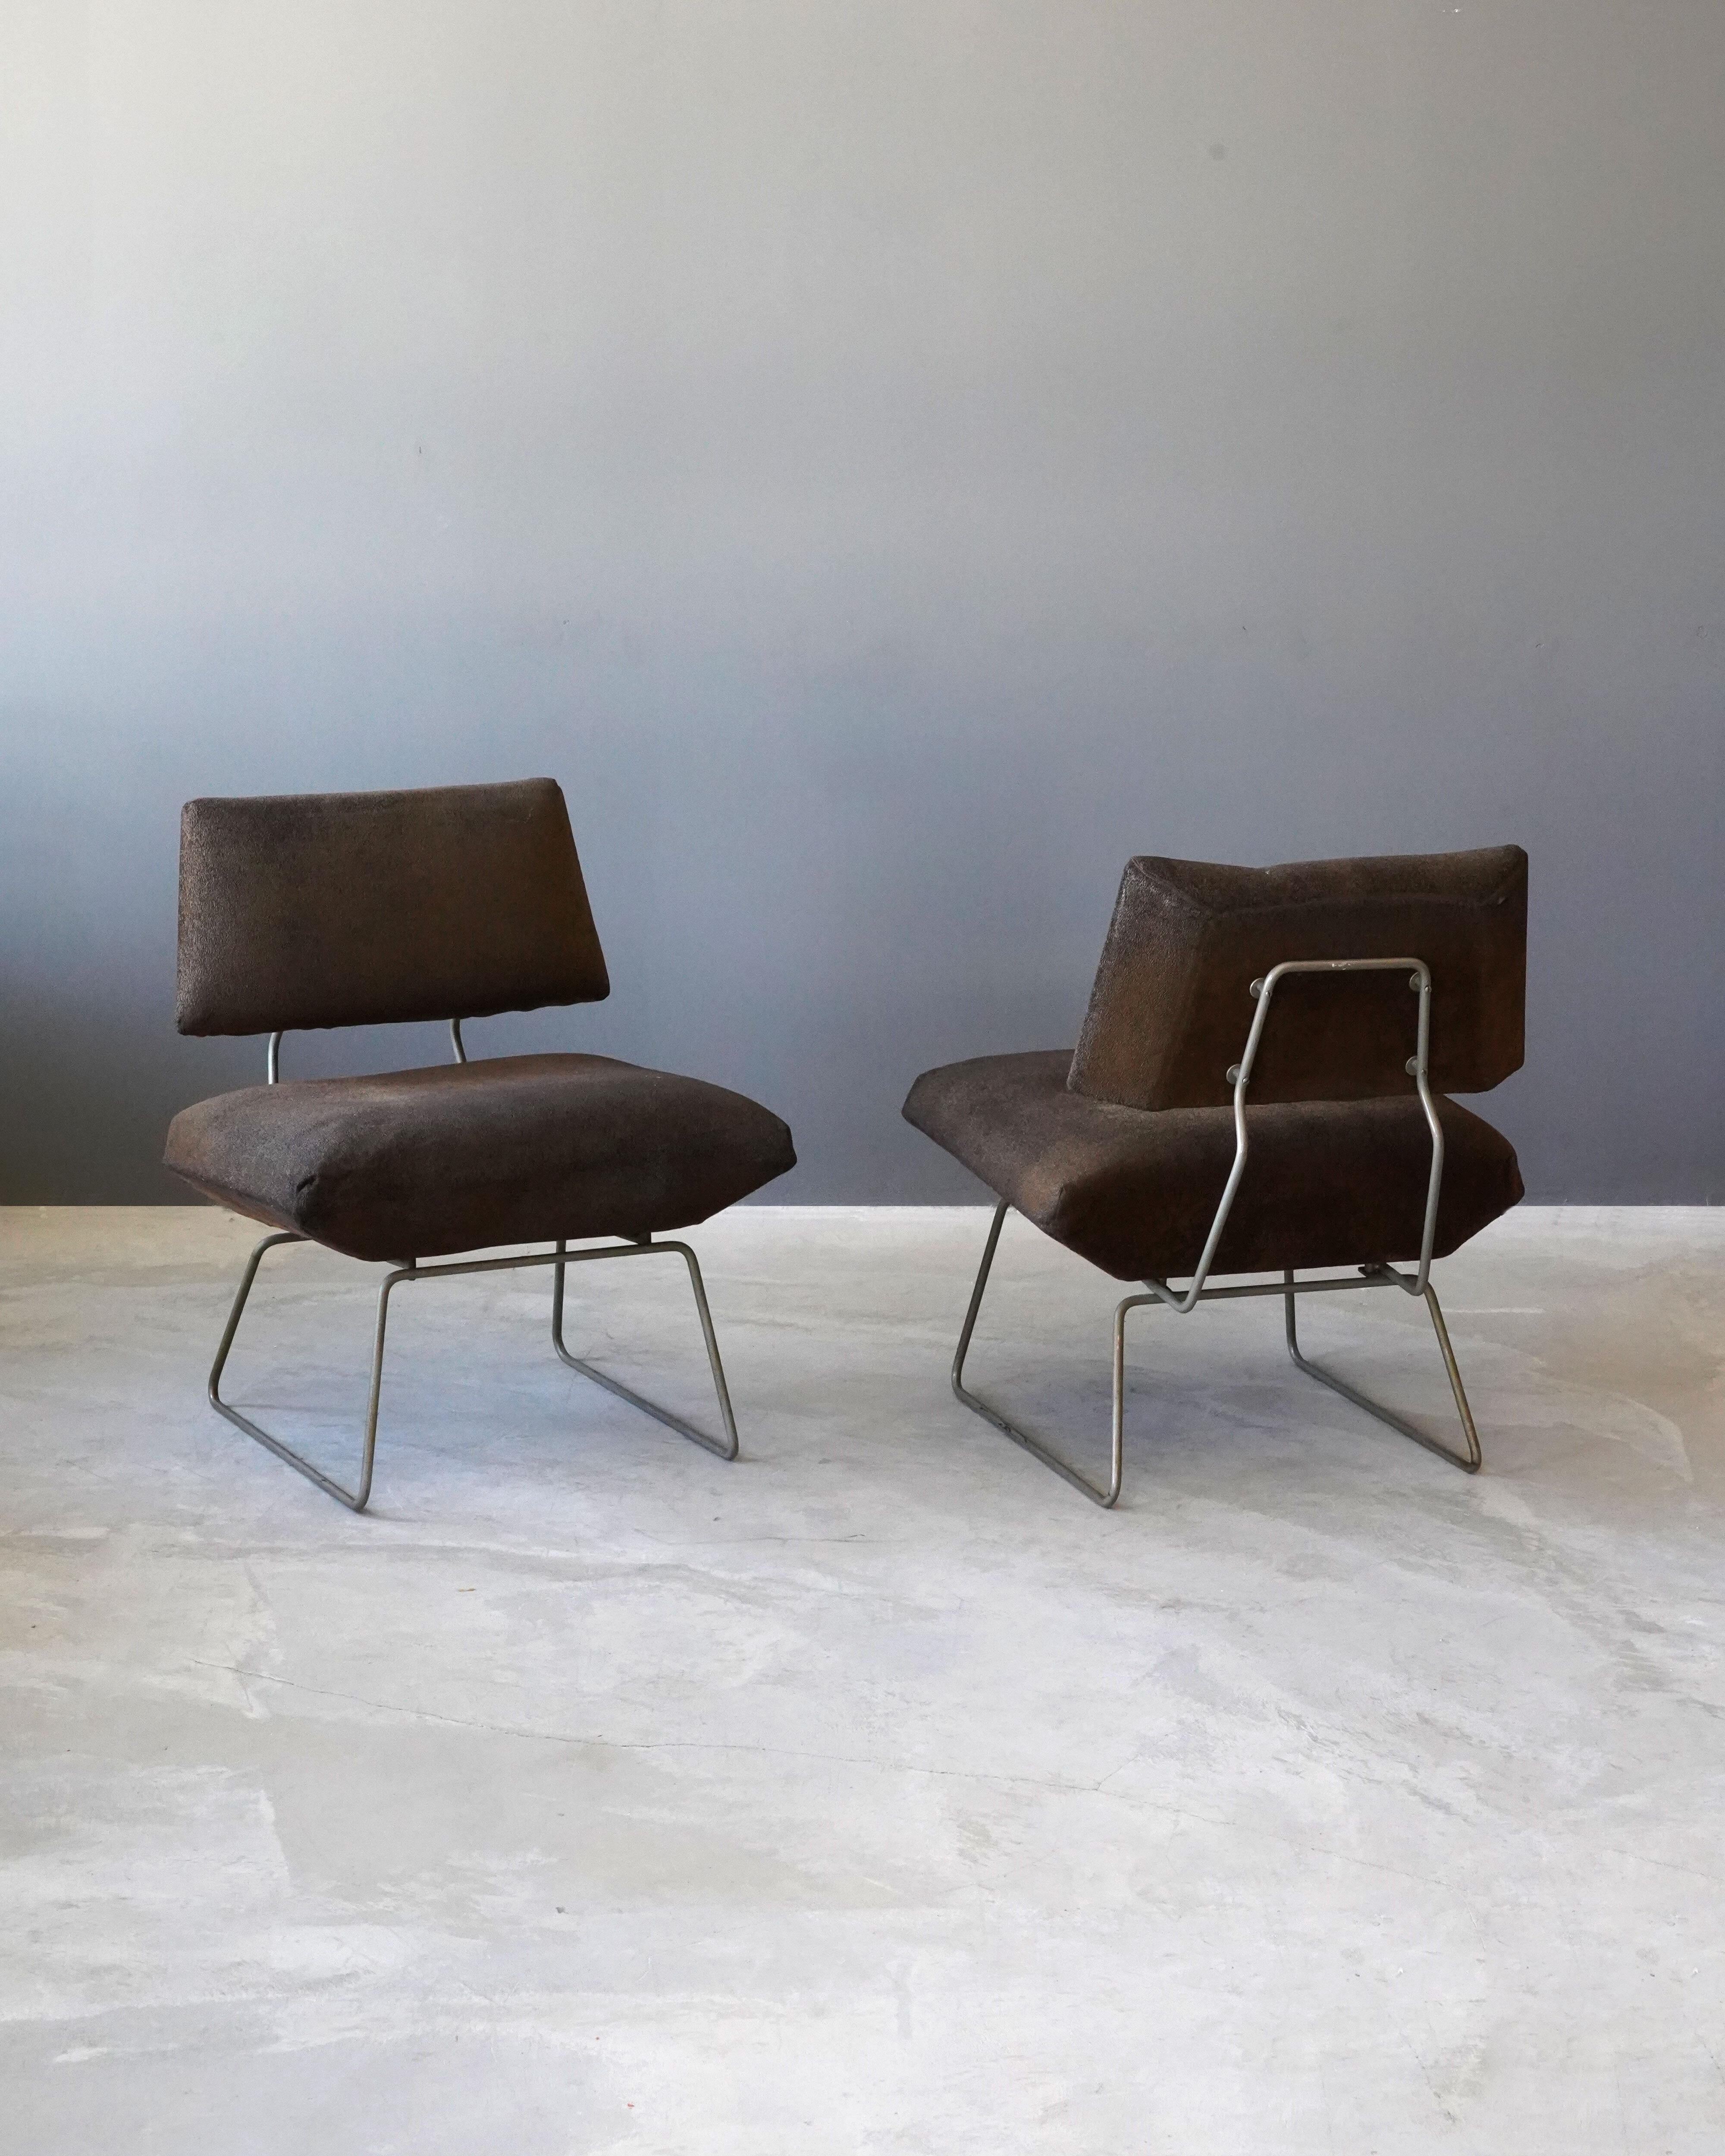 A pair of minimalist lounge chairs / slipper chairs. Designed by George Coslin Italy, 1960s. Metal frame supports overstuffed seat and back upholstered in it's original vintage fabric.

Litterature: Catalogo del produttore, Trevi Spa, foto di